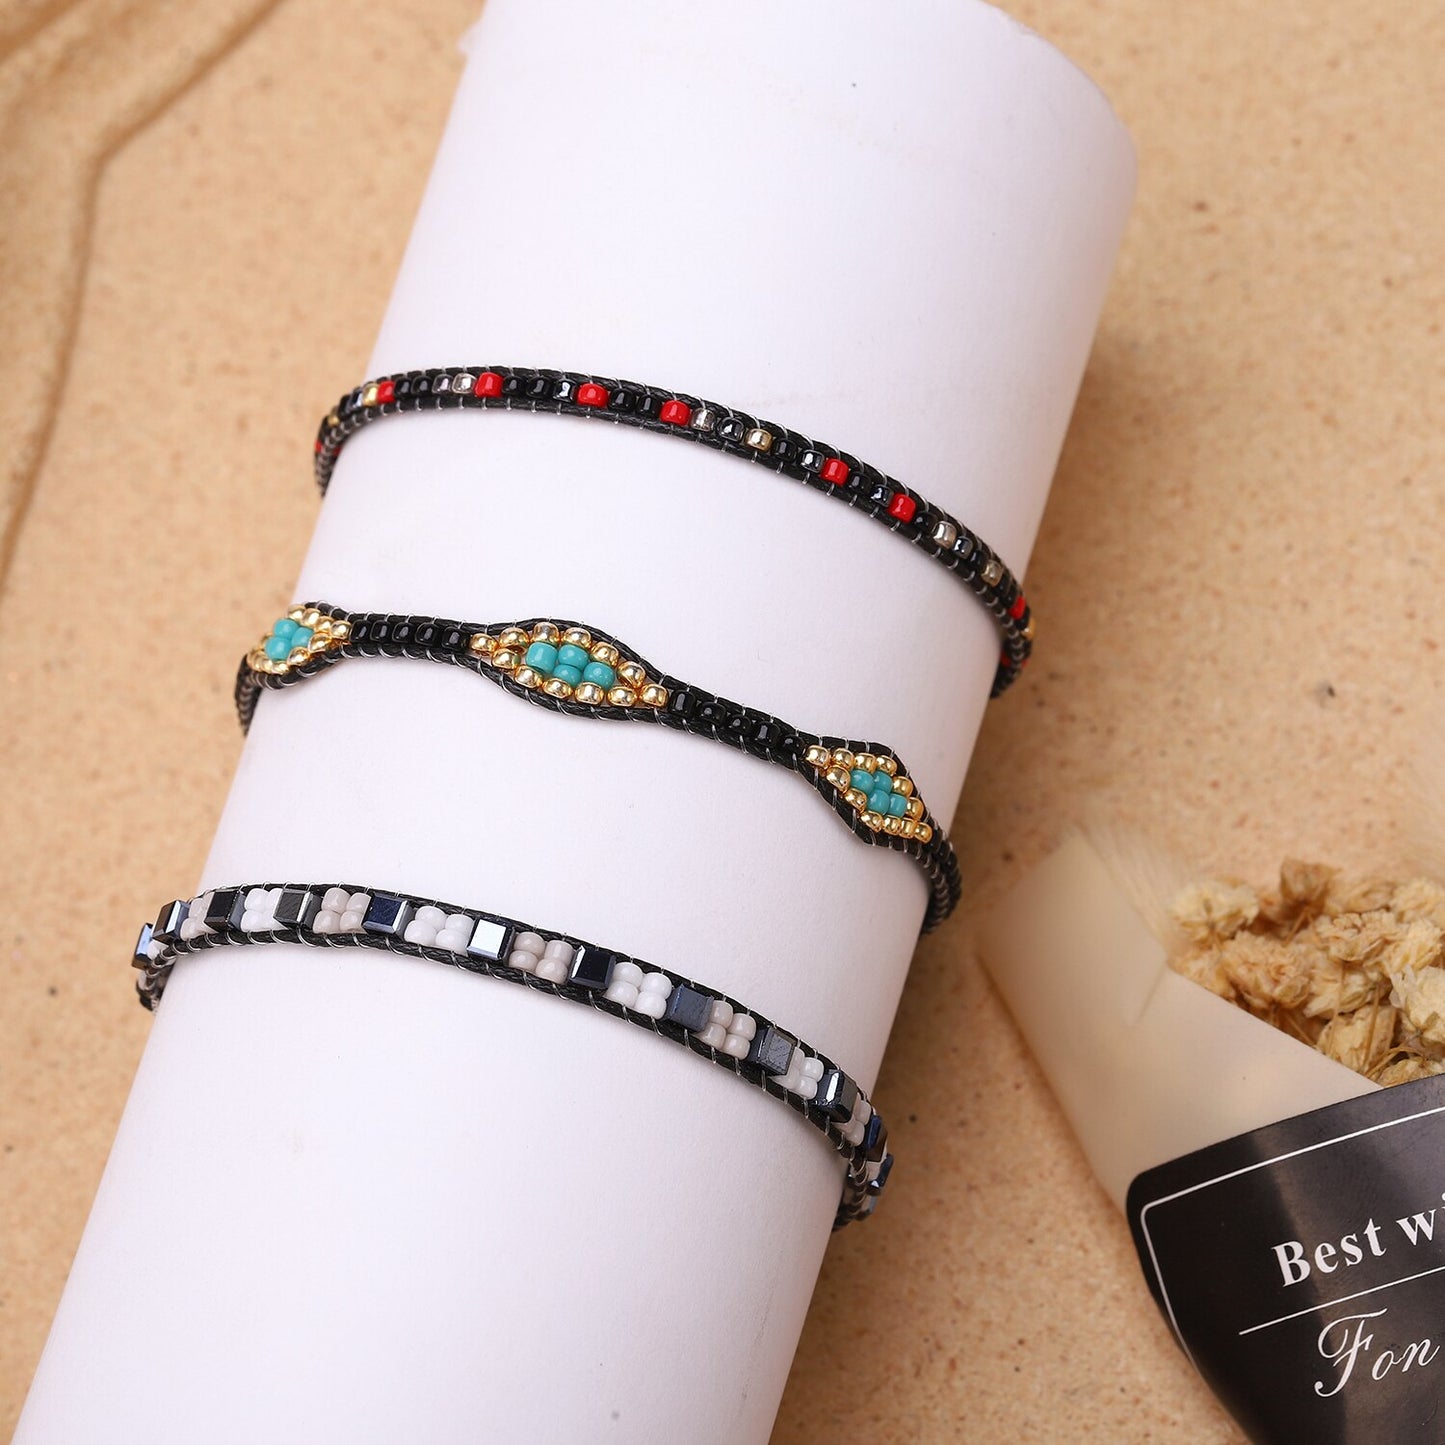 3pcs Boho Faceted Crystal Japan Seed Beads Woven Wrap Bracelet for Women Men Handmade Braid Summer Surf Anklet Fashion Jewelry